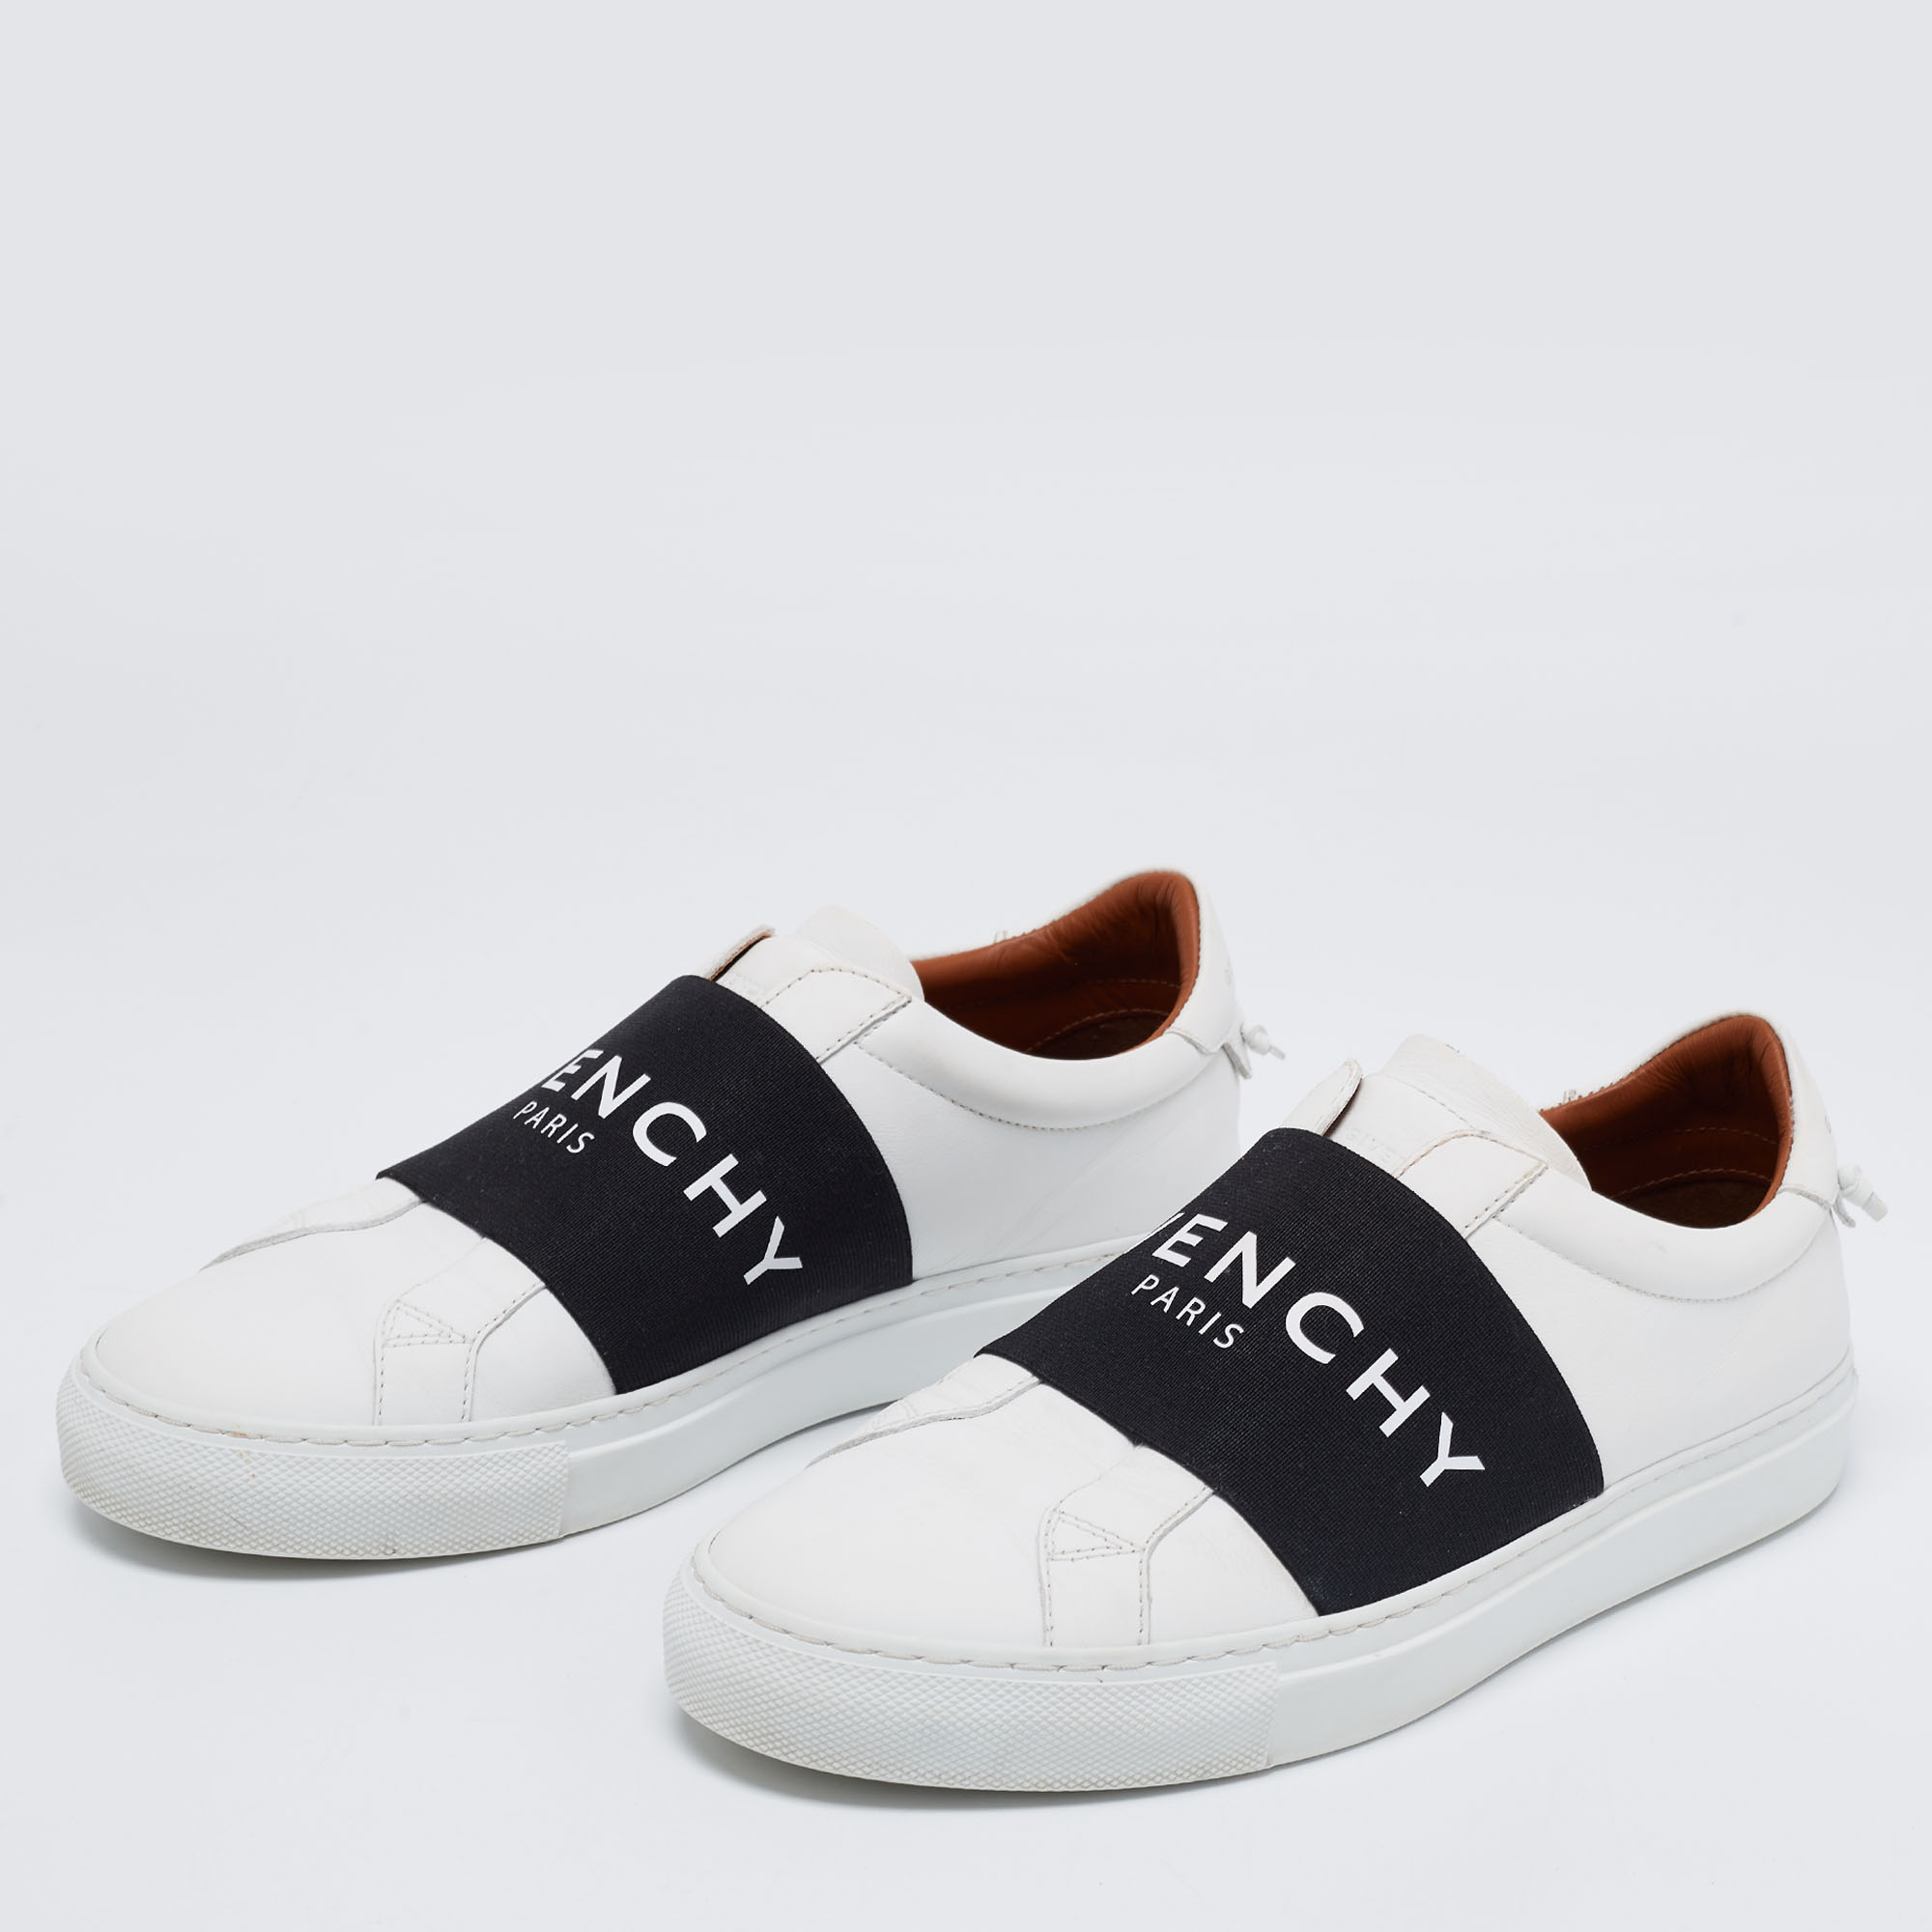 

Givenchy White/Black Leather And Logo Stretch Band Urban Street Slip On Sneakers Size